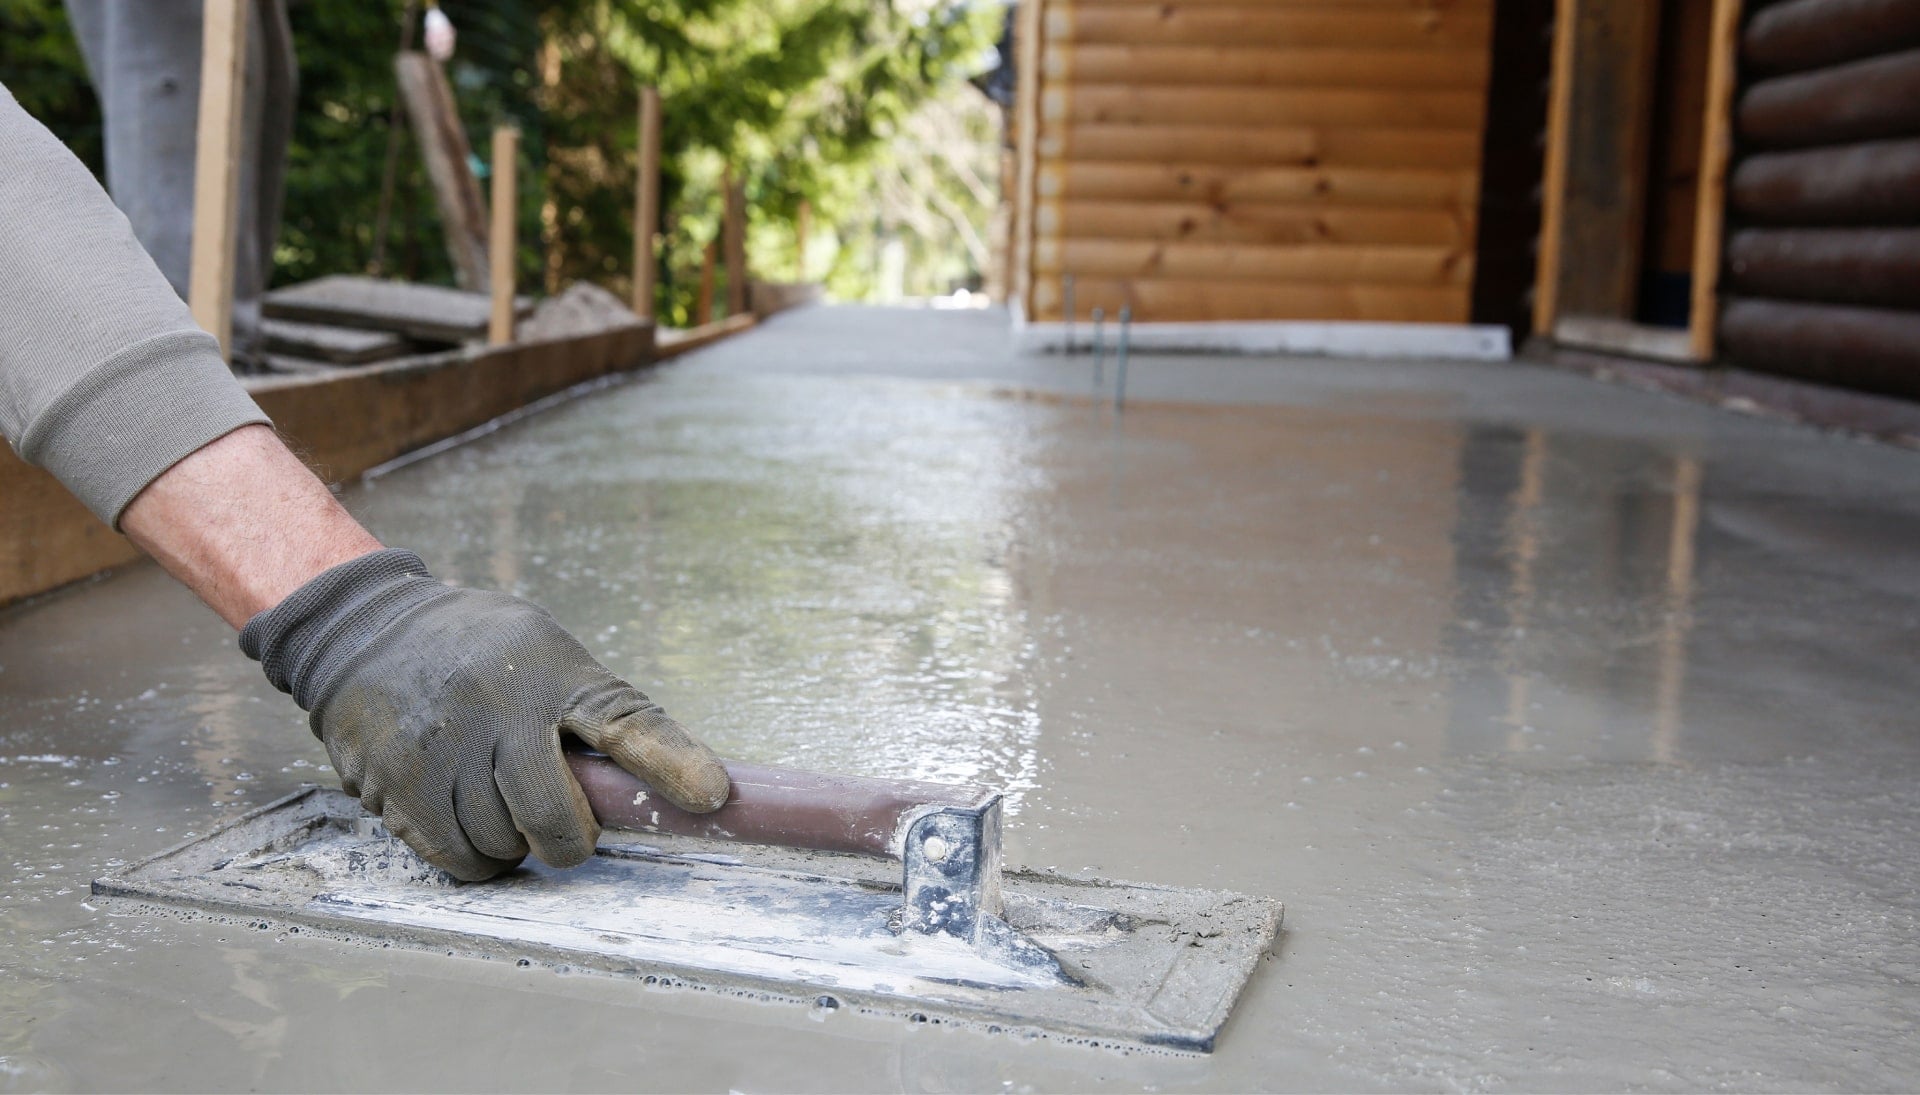 Smooth and Level Your Floors with Precision Concrete Floor Leveling Services in Seattle, WA - Eliminate Uneven Surfaces, Tripping Hazards, and Costly Damages with State-of-the-Art Equipment and Skilled Professionals.